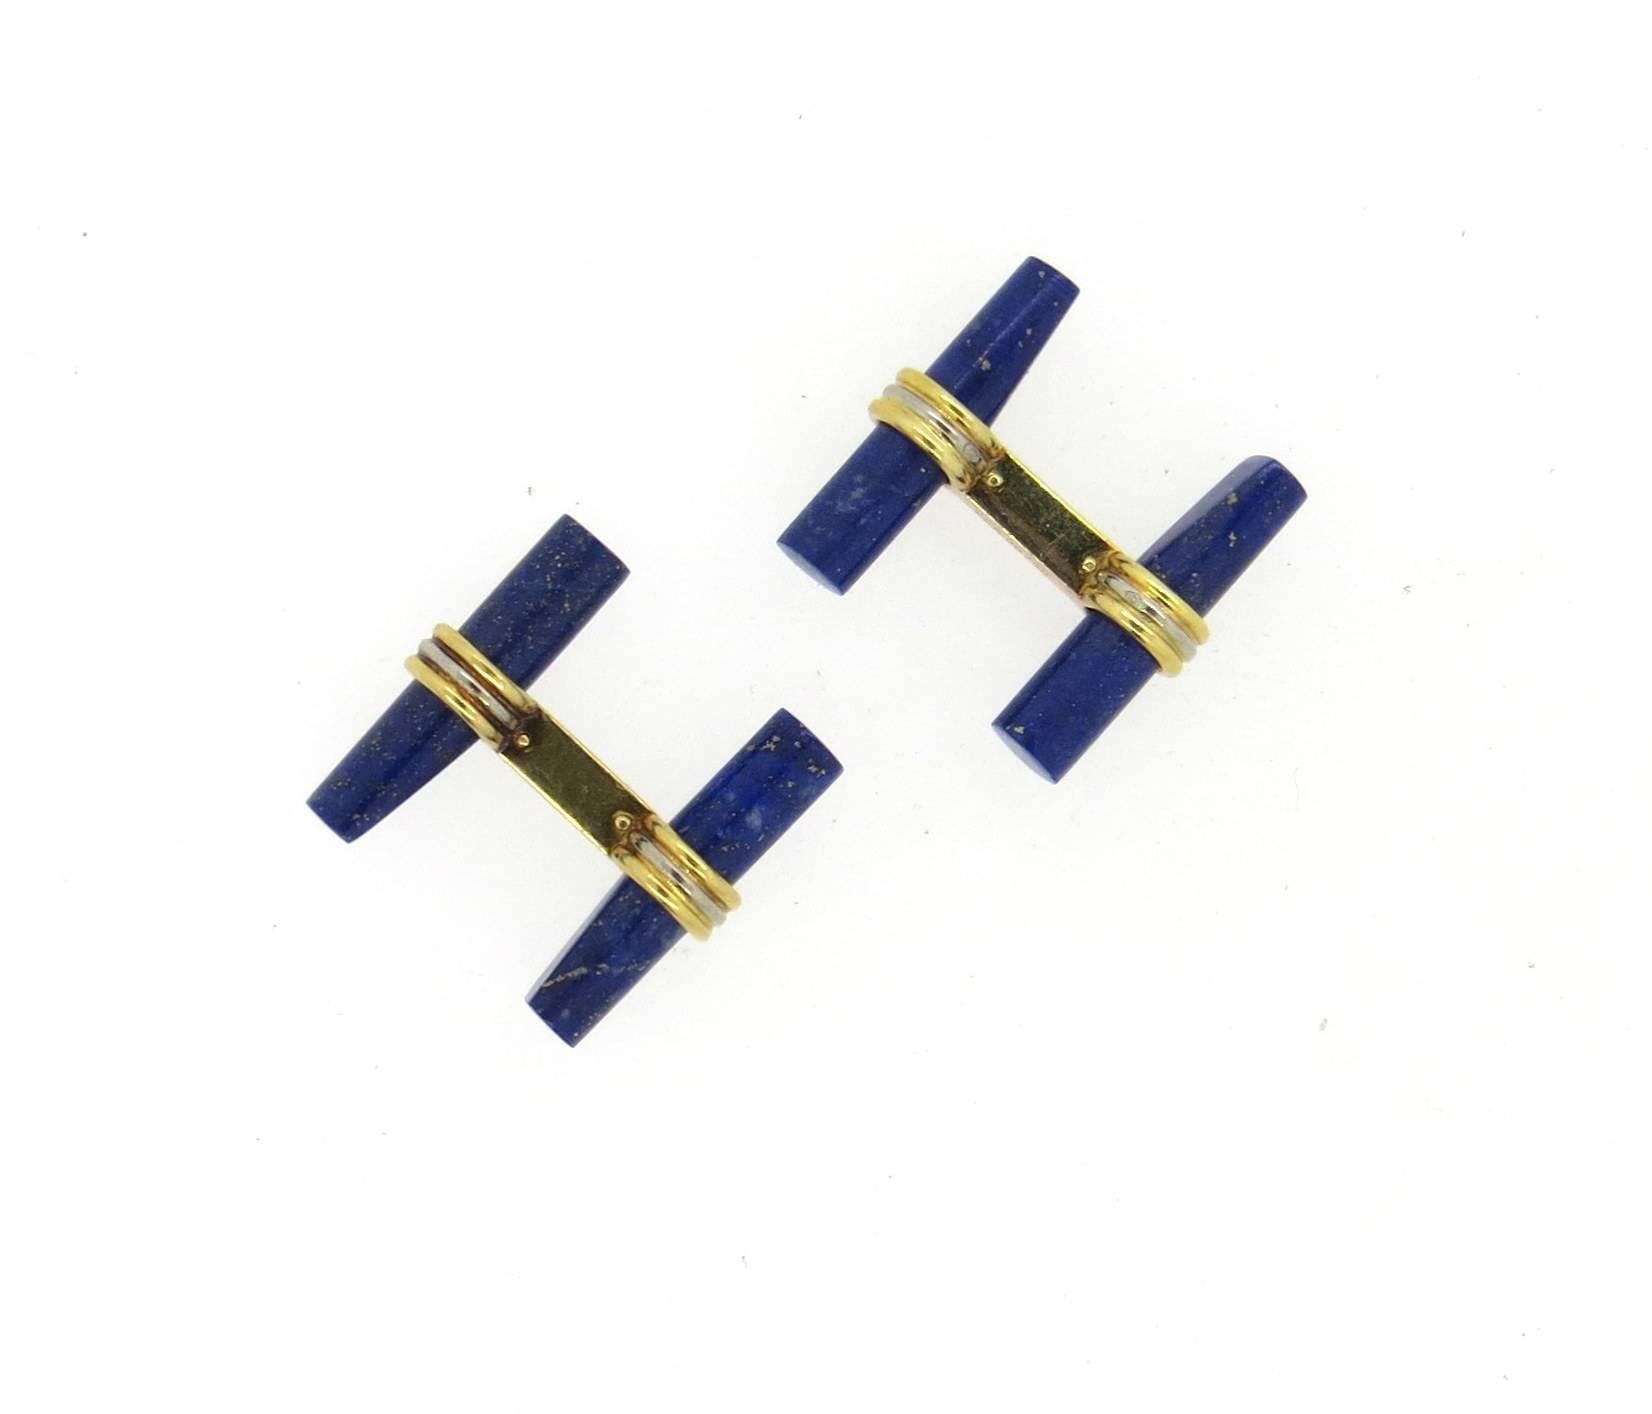 A pair of vintage 18k yellow gold cufflinks, crafted by Van Cleef & Arpels, set with lapis lazuli stones. Each top measures 22mm x 7mm. Marked: VCA, OR750, B9107 1 360. Weight - 10.9 grams 